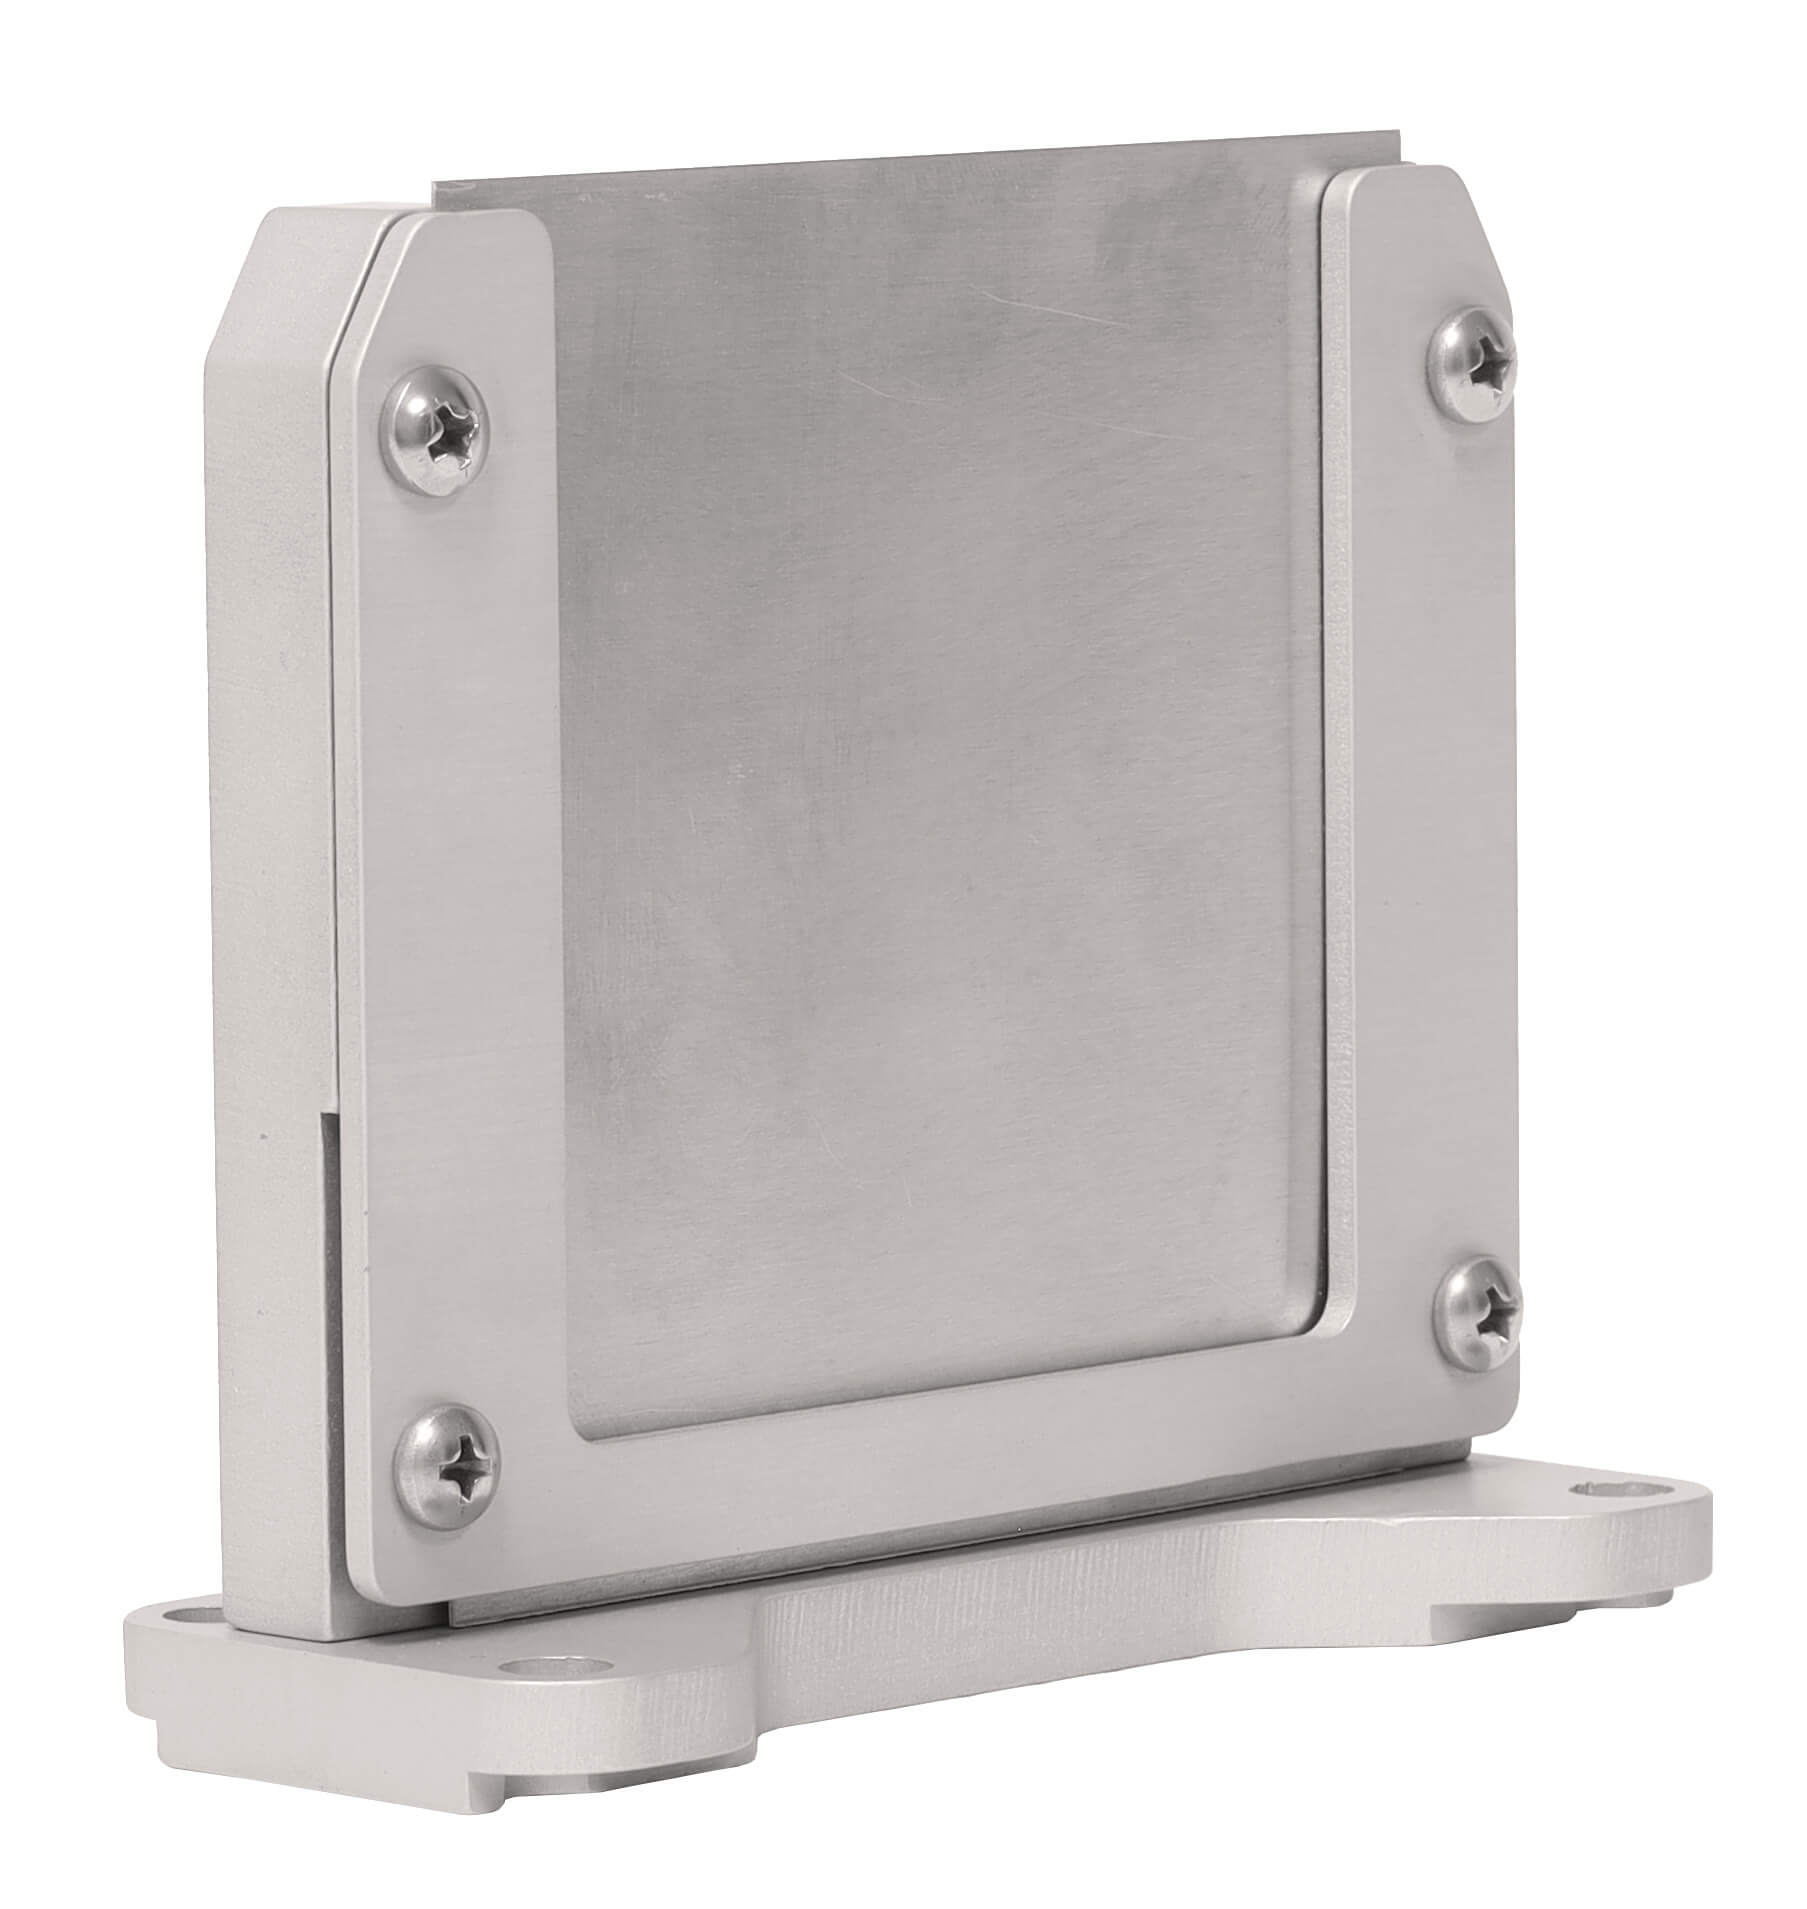 This headform can also be bought with an optional witness plate holder
and witness plates.